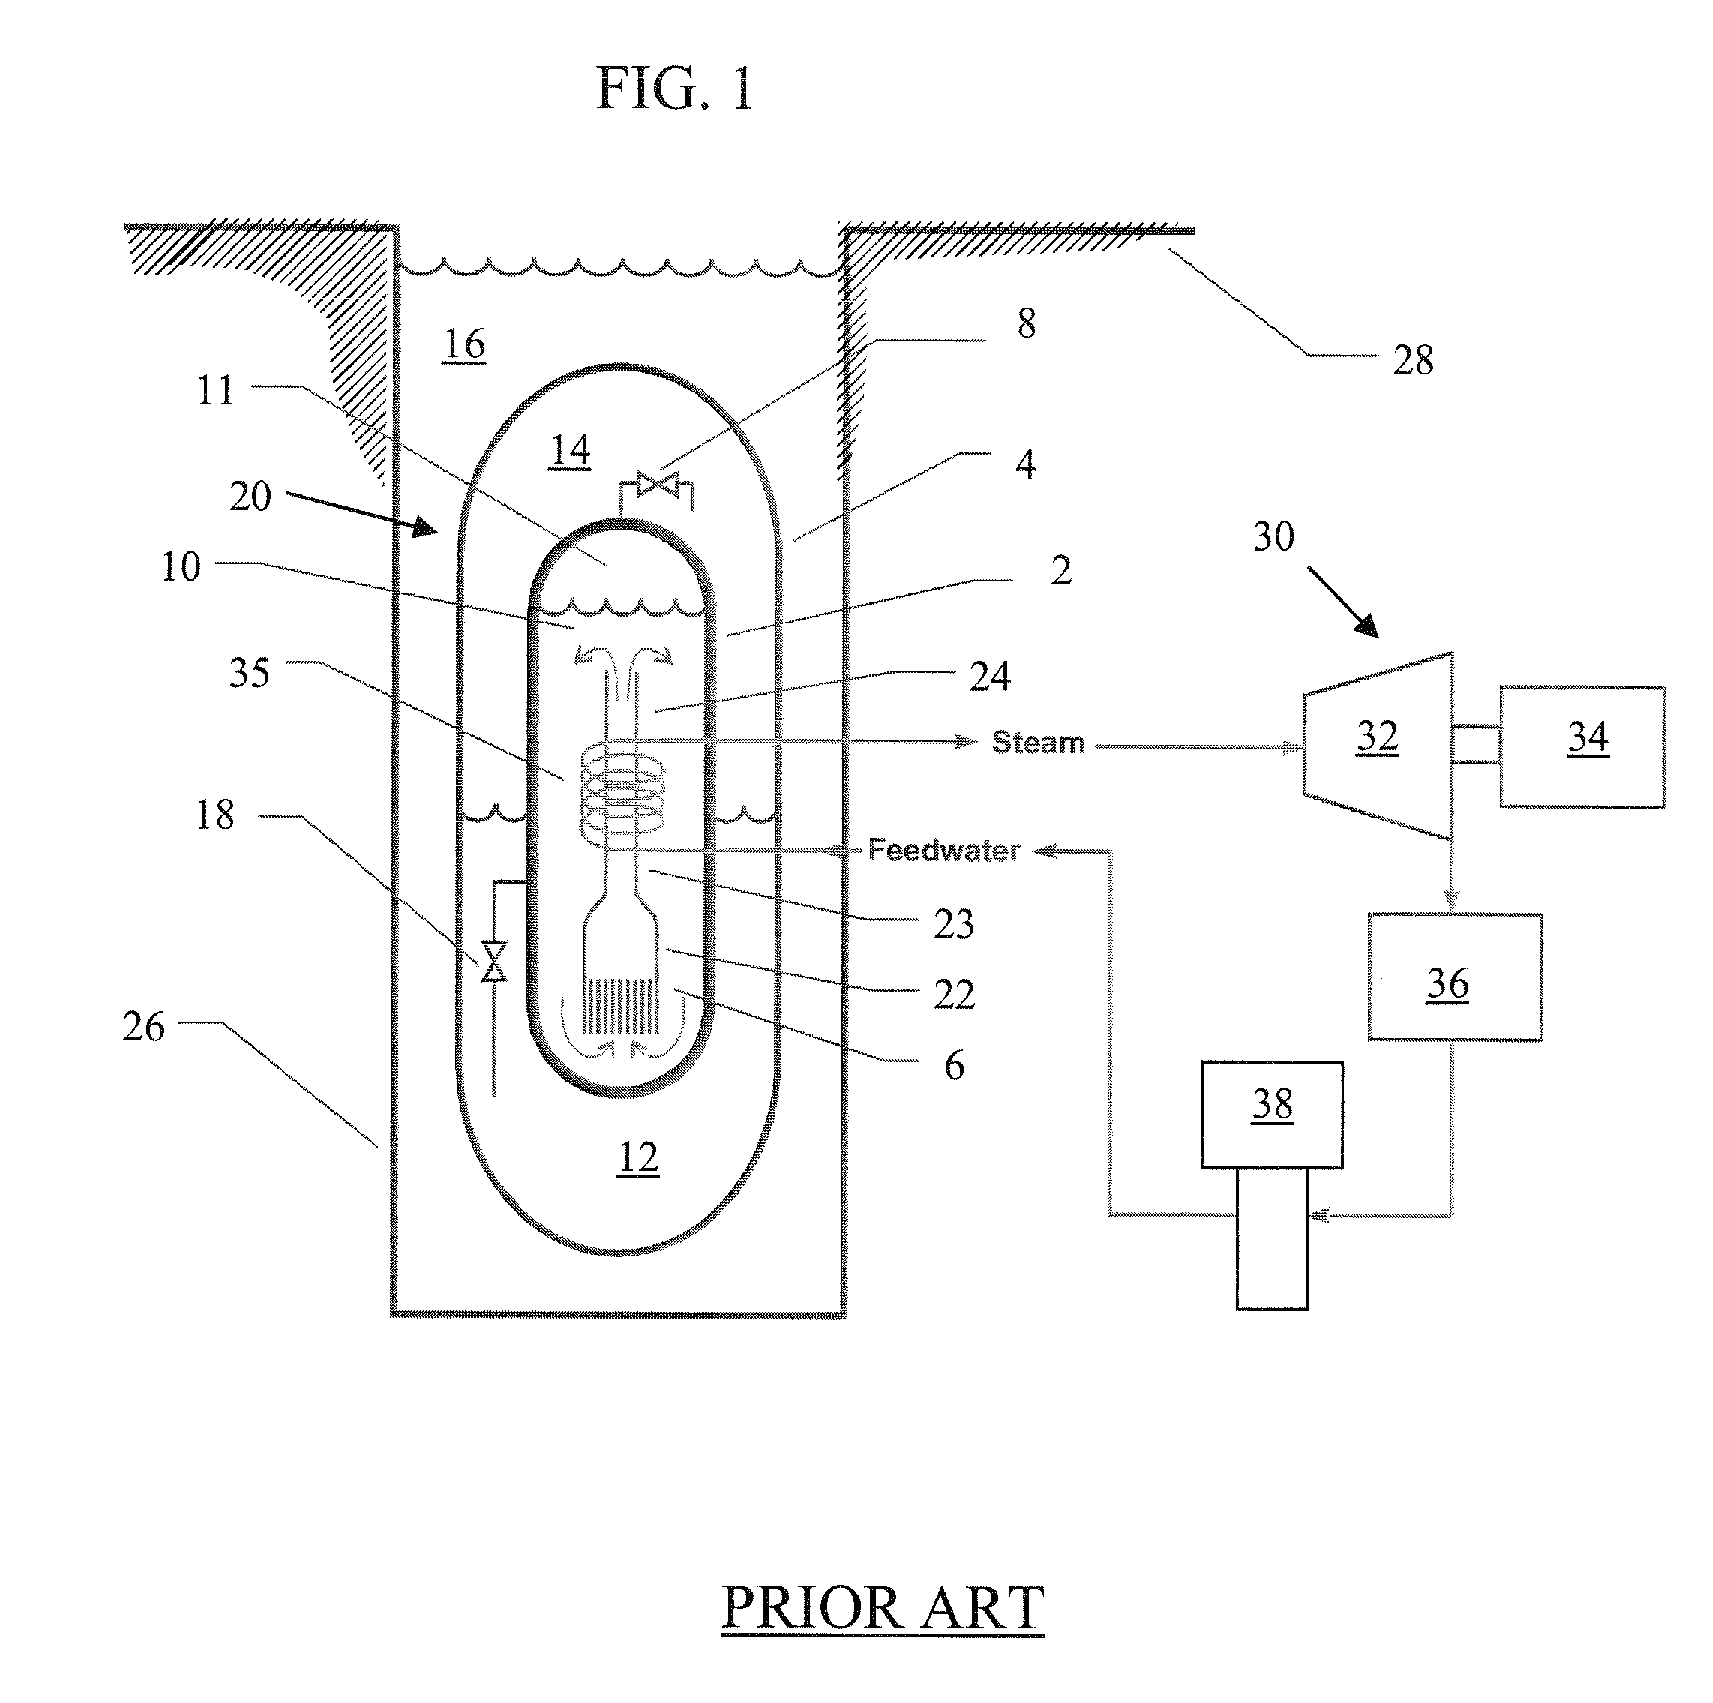 Internal dry containment vessel for a nuclear reactor